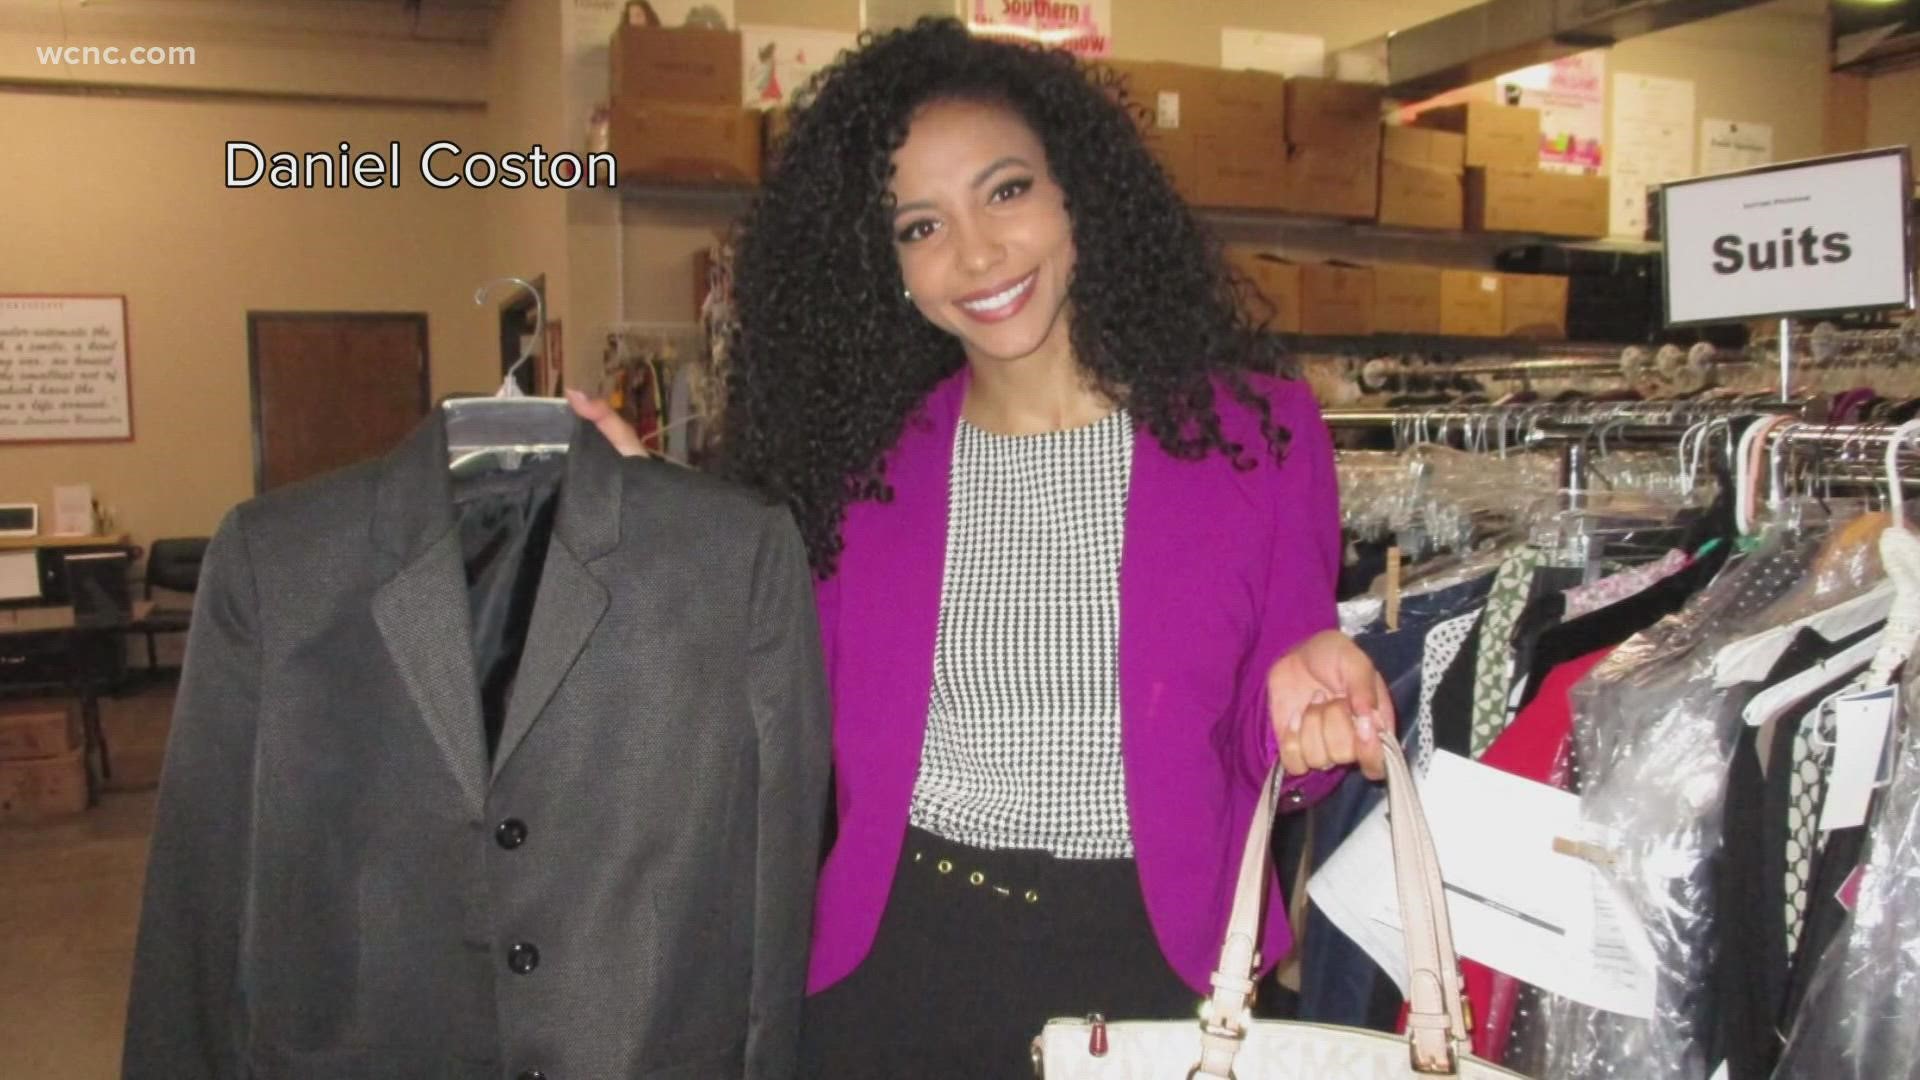 Among her volunteering efforts, Charlotte native and Miss USA 2019 Cheslie Kryst volunteered with Dress for Success to help women feel dressed for their best.